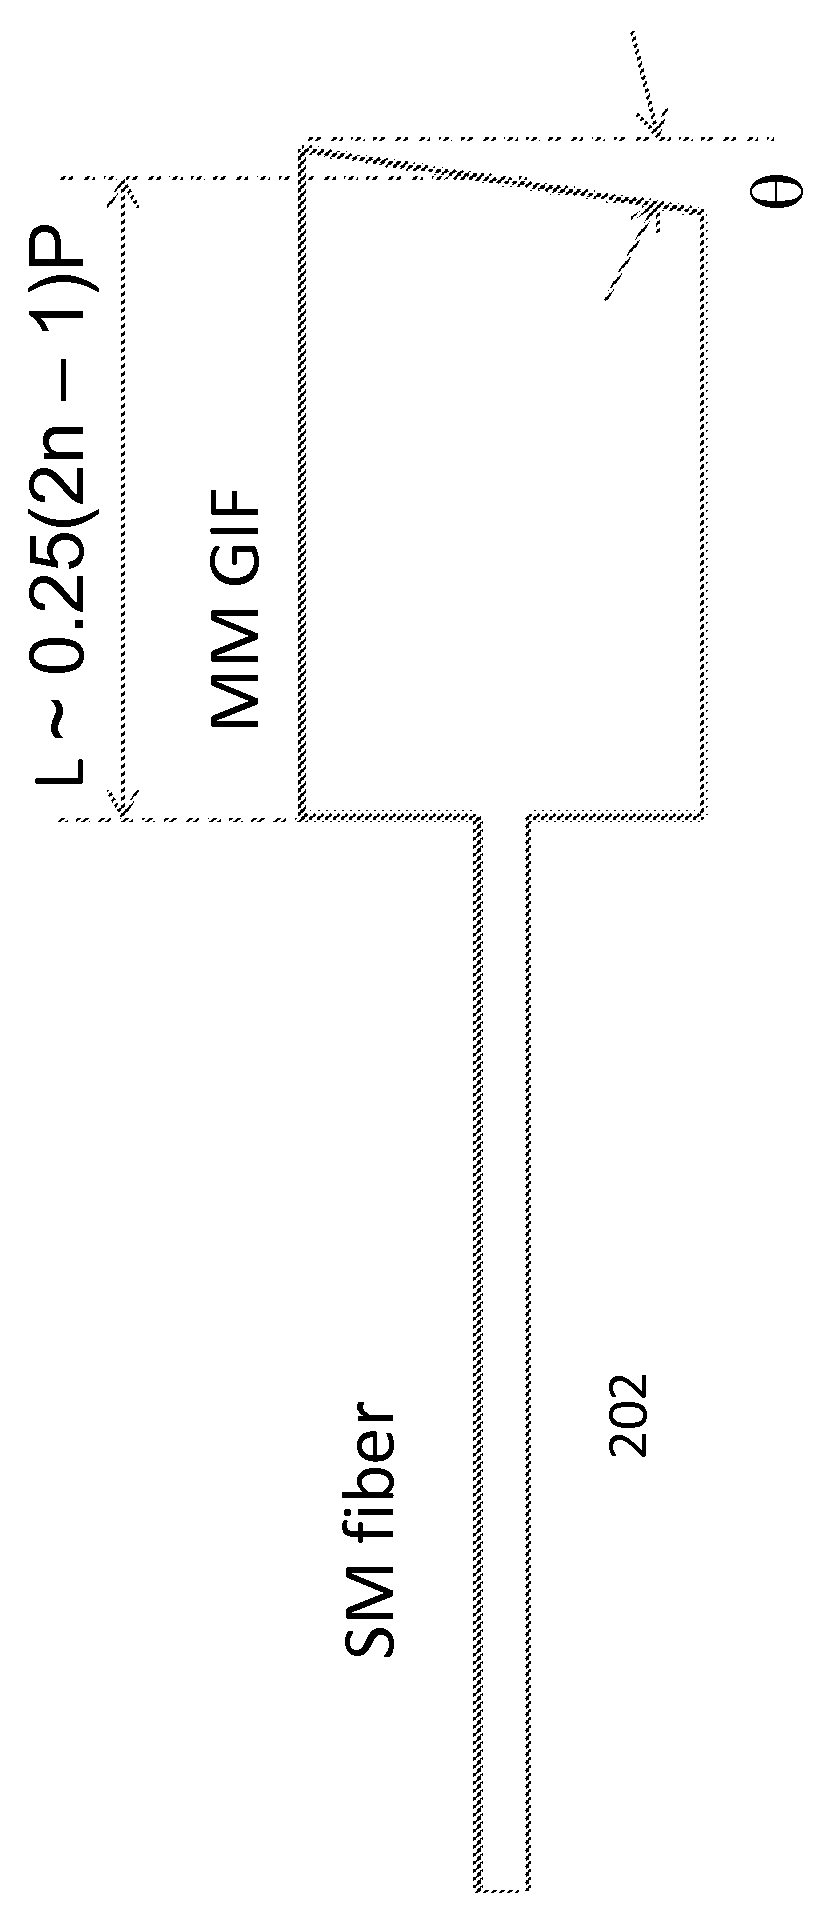 Two-port optical devices using mini-collimators